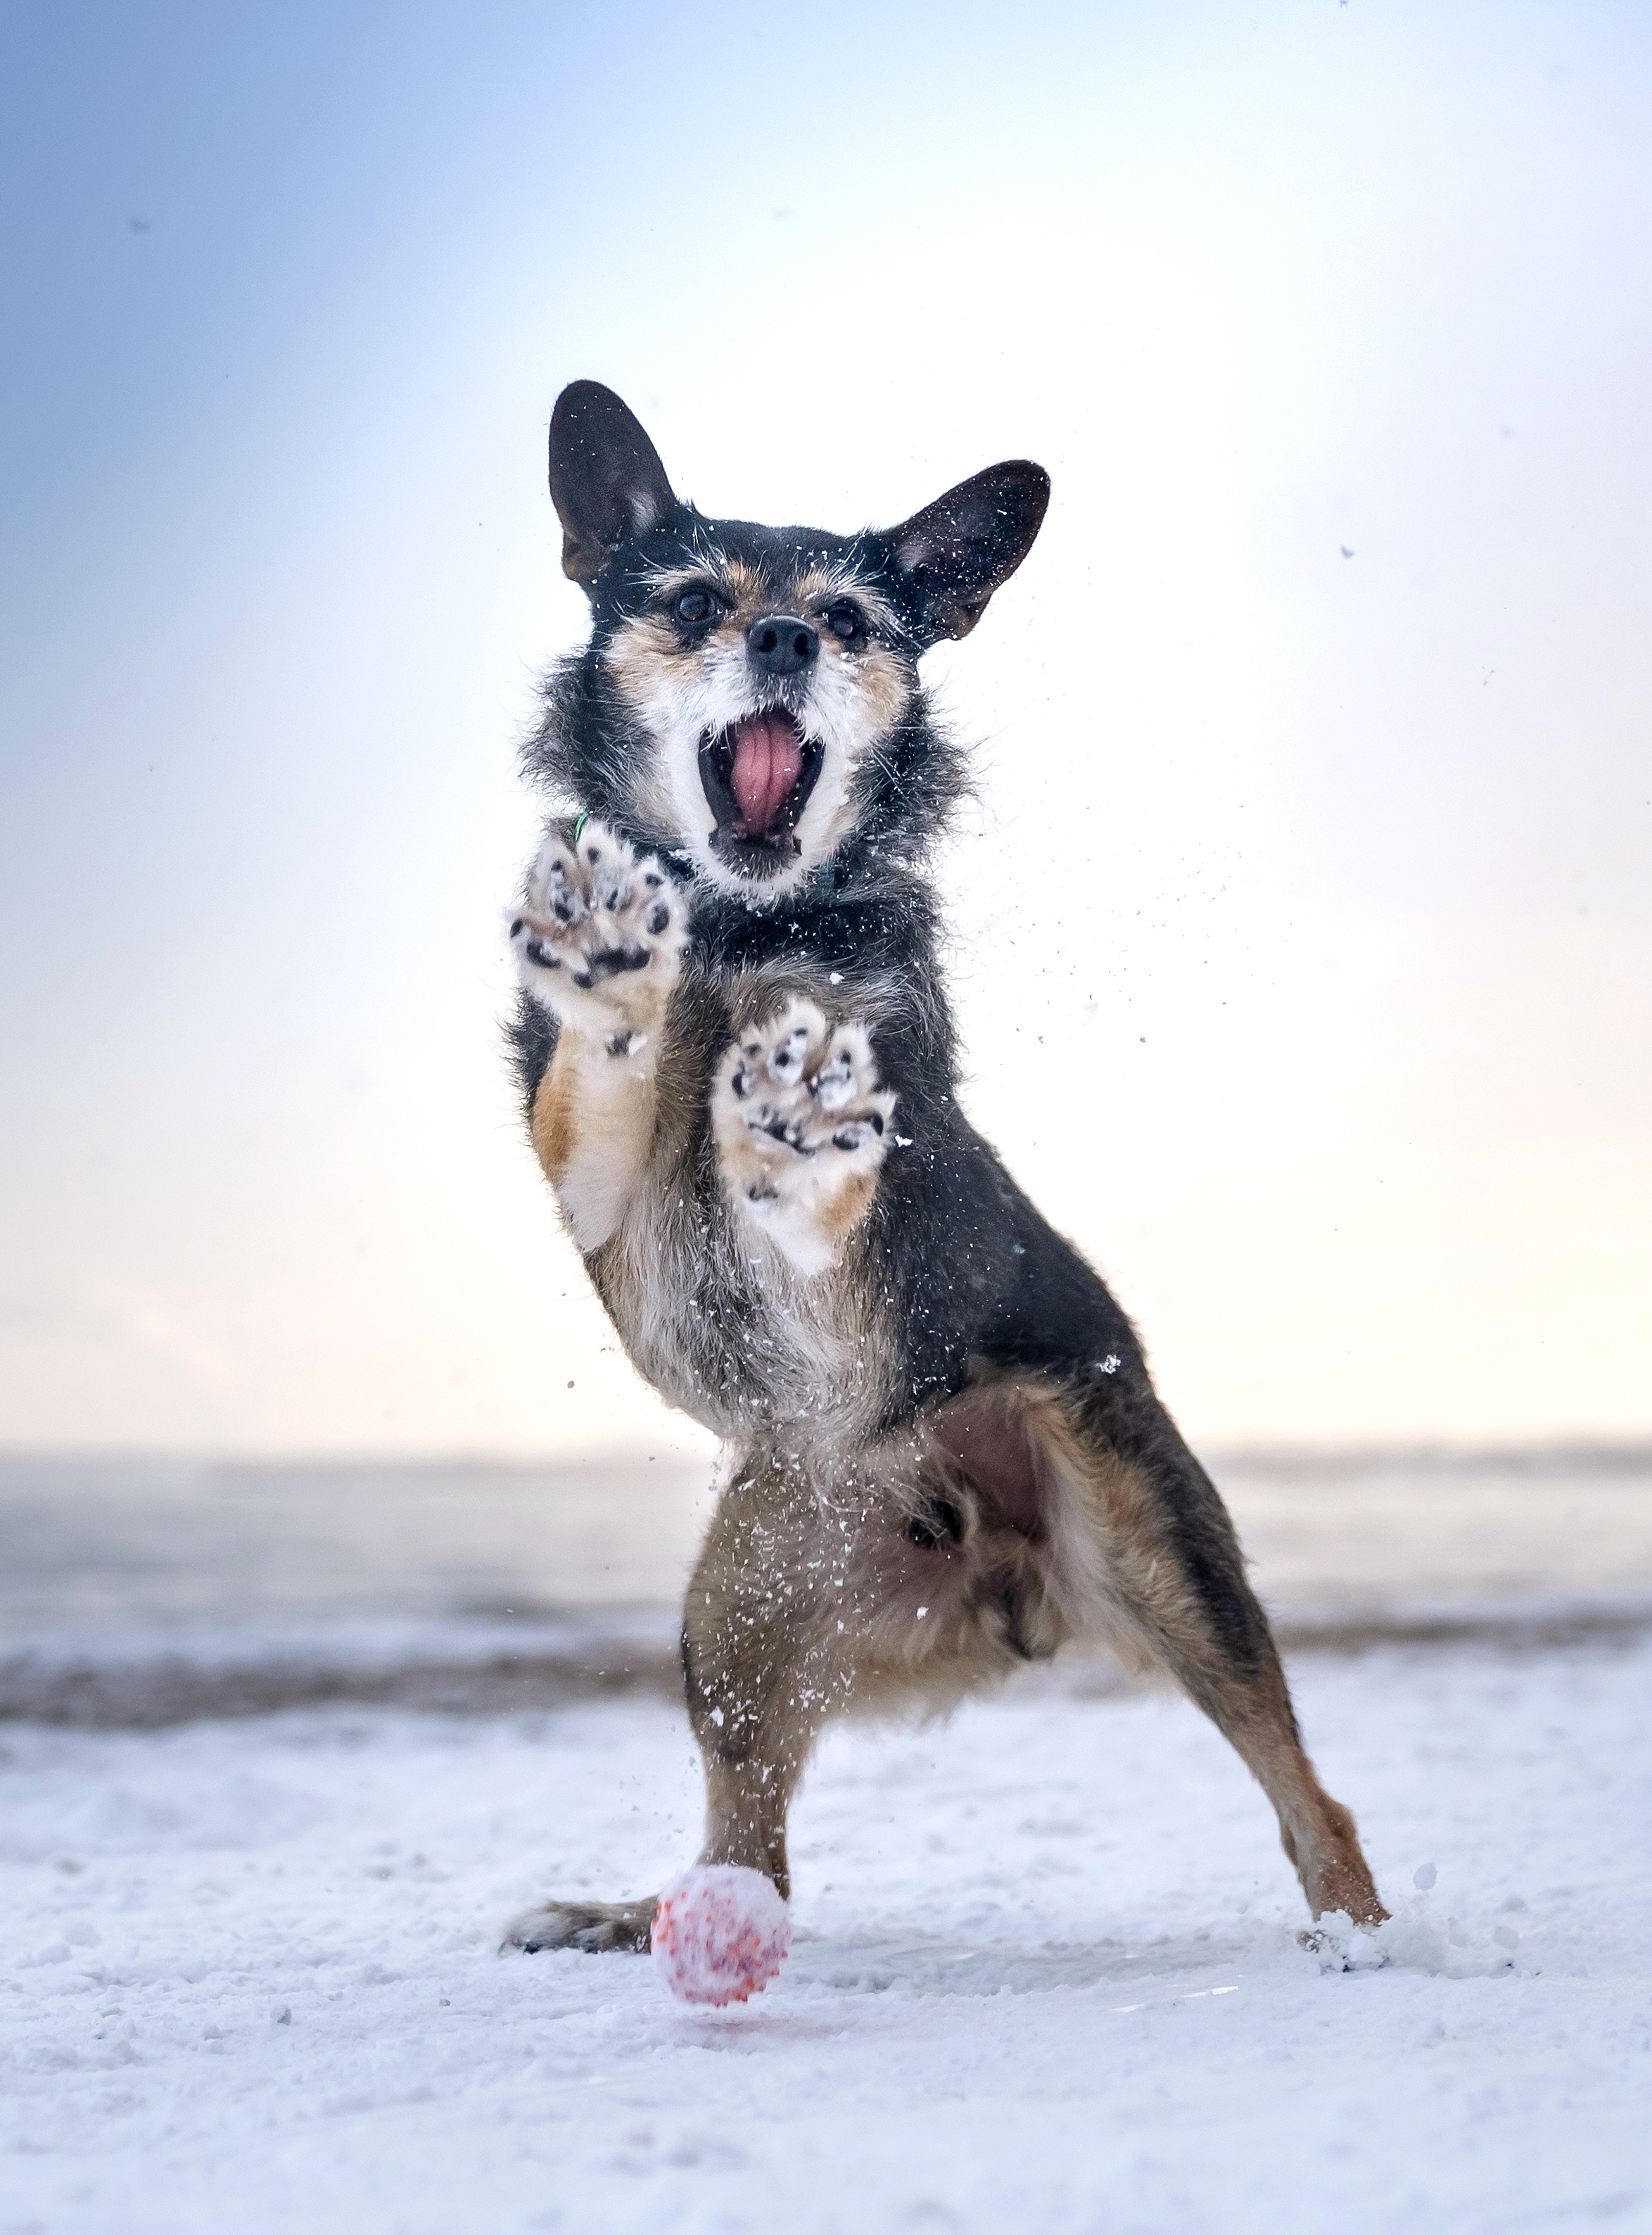 Dog standing on hind legs with front paws up and mouth open as if catching something, on snowy ground